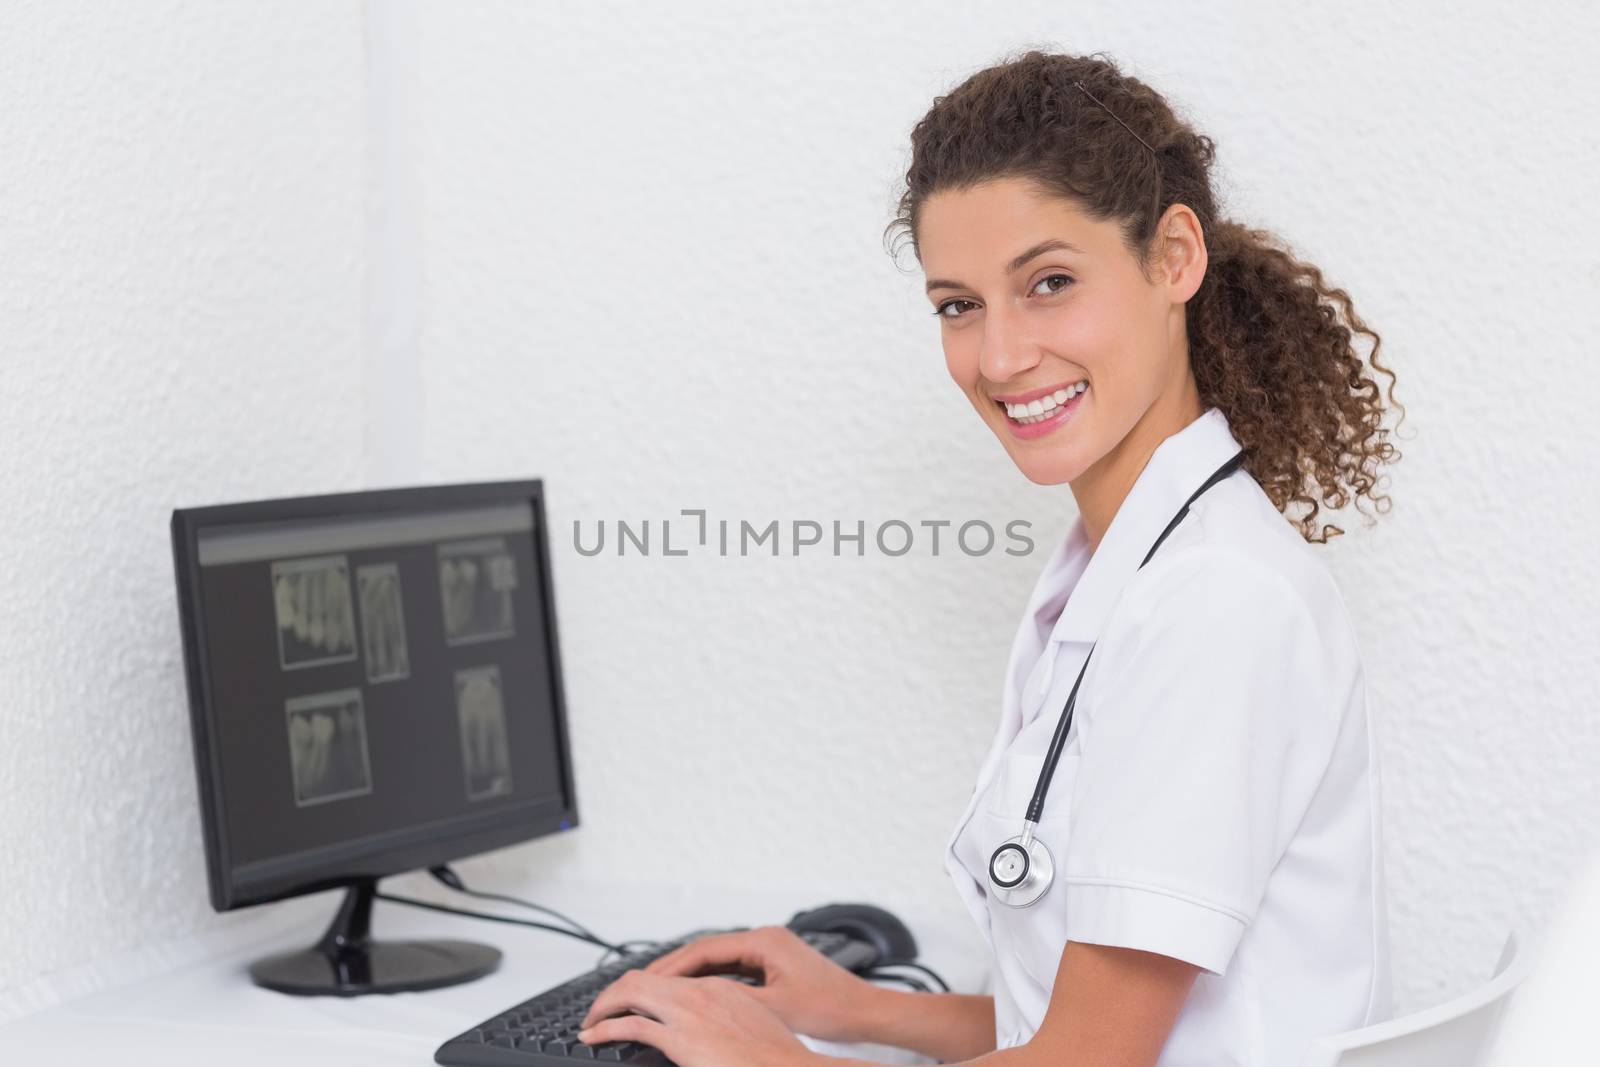 Dental assistant working on computer smiling at camera by Wavebreakmedia